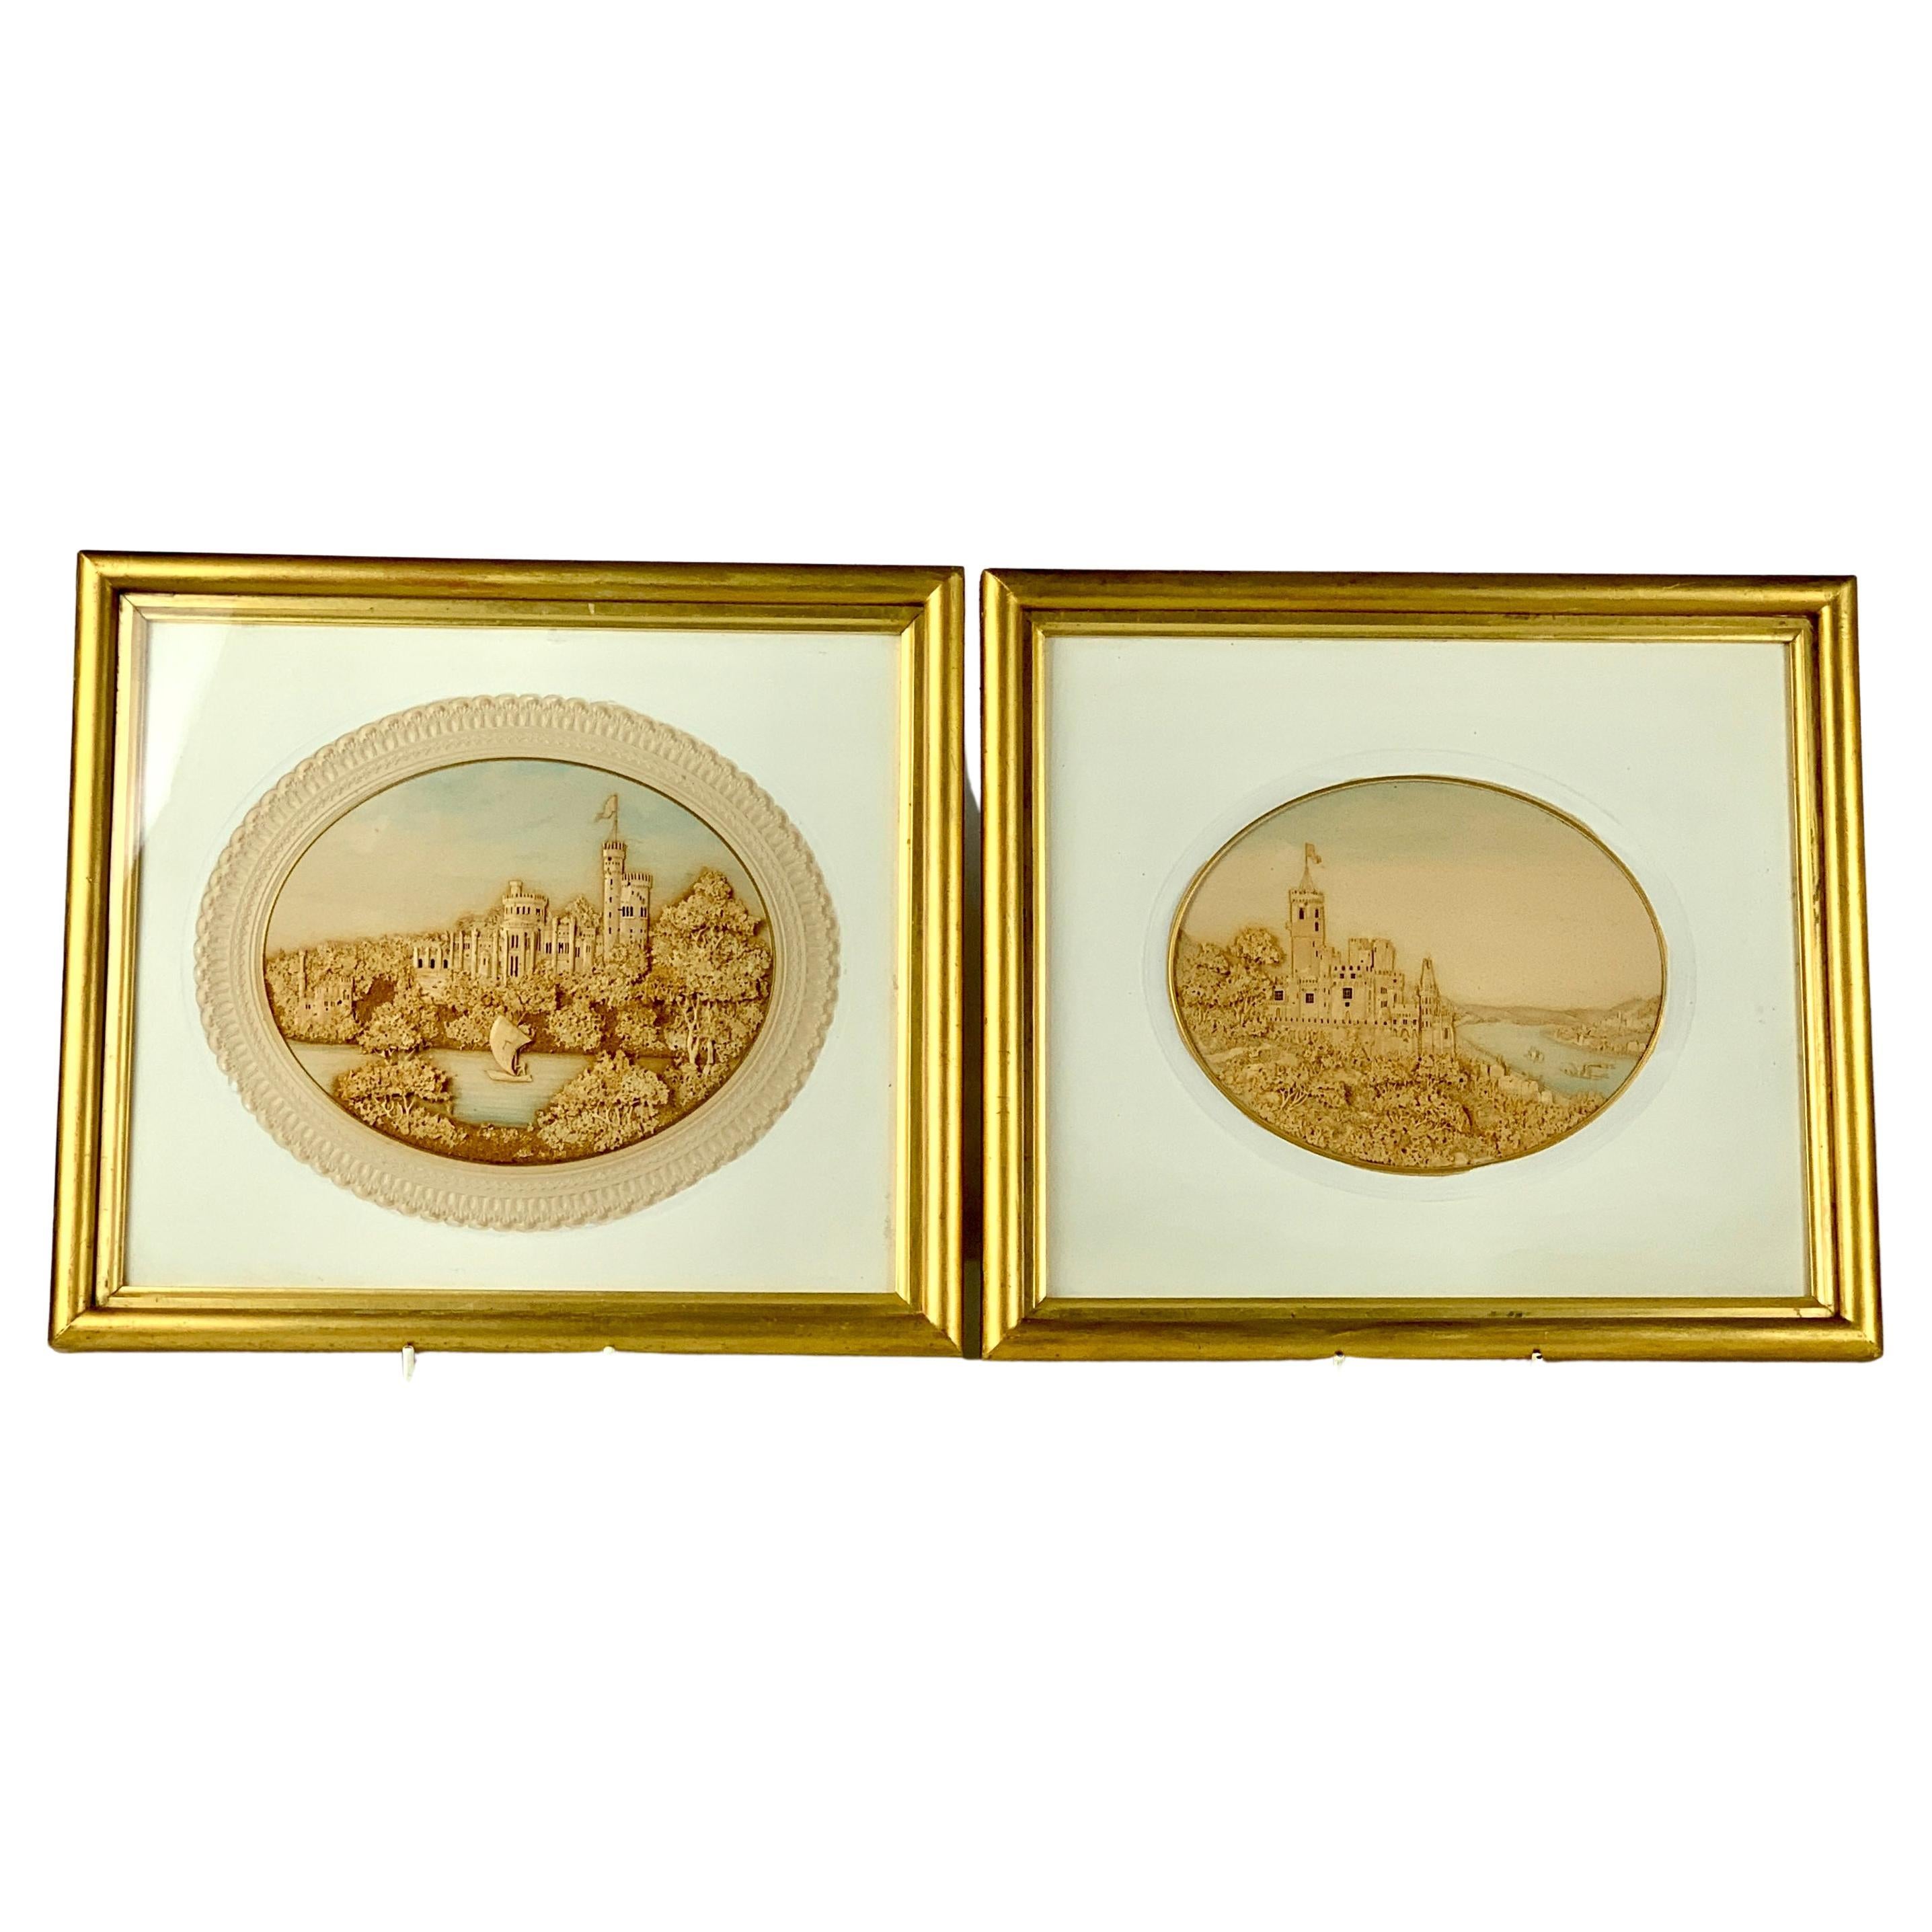 Pair Hand Crafted Corkwork Dioramas with Scenes of English Castles Circa 1840